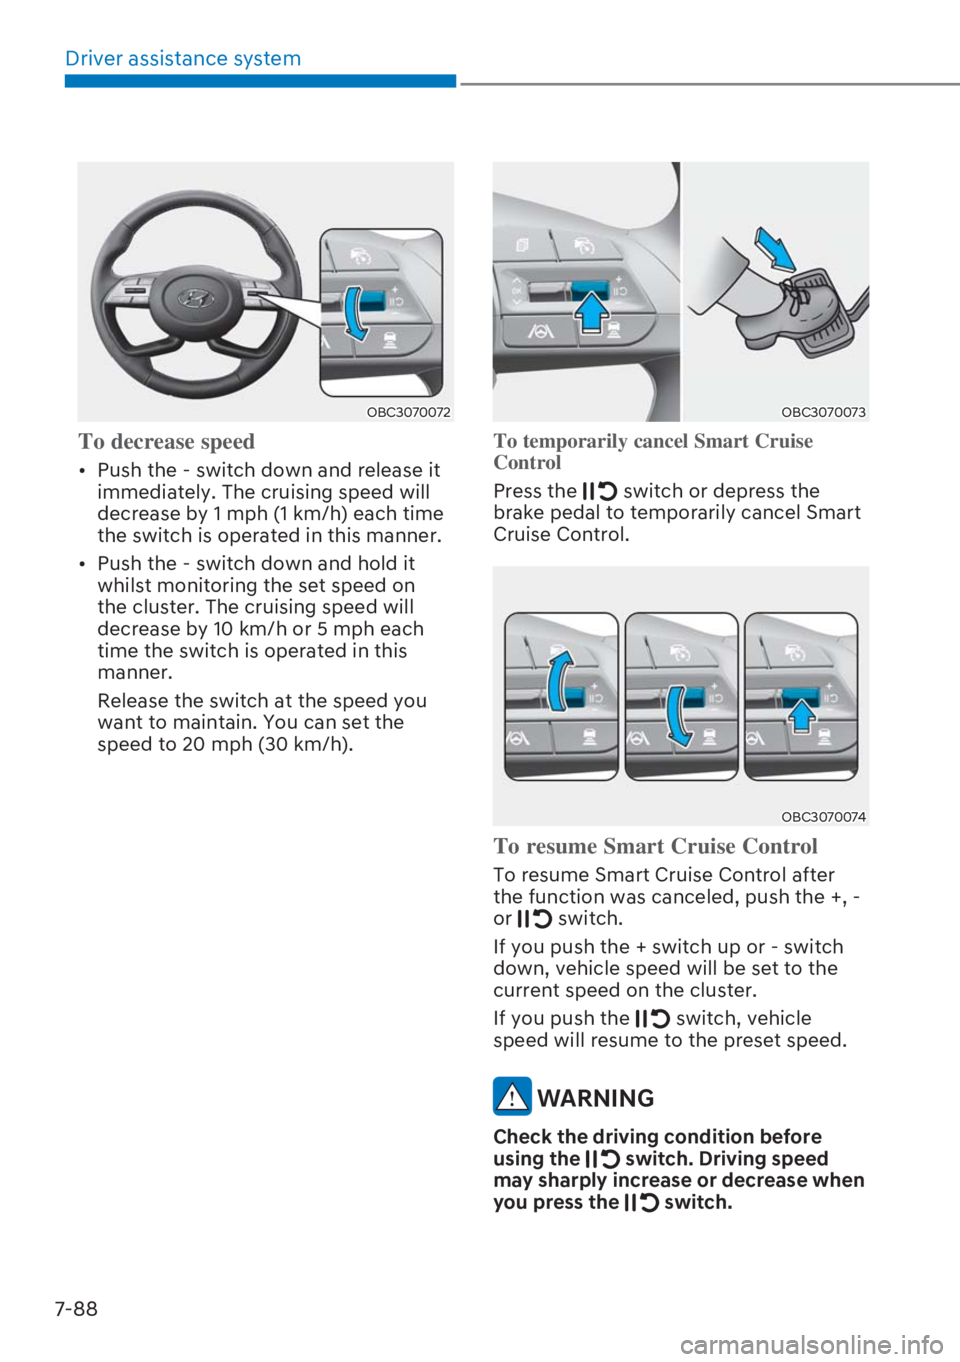 HYUNDAI I20 2023  Owners Manual Driver assistance system
7-88
OBC3070072
To decrease speed
[�Push the - switch down and release it 
immediately. The cruising speed will 
decrease by 1 mph (1 km/h) each time 
the switch is operated